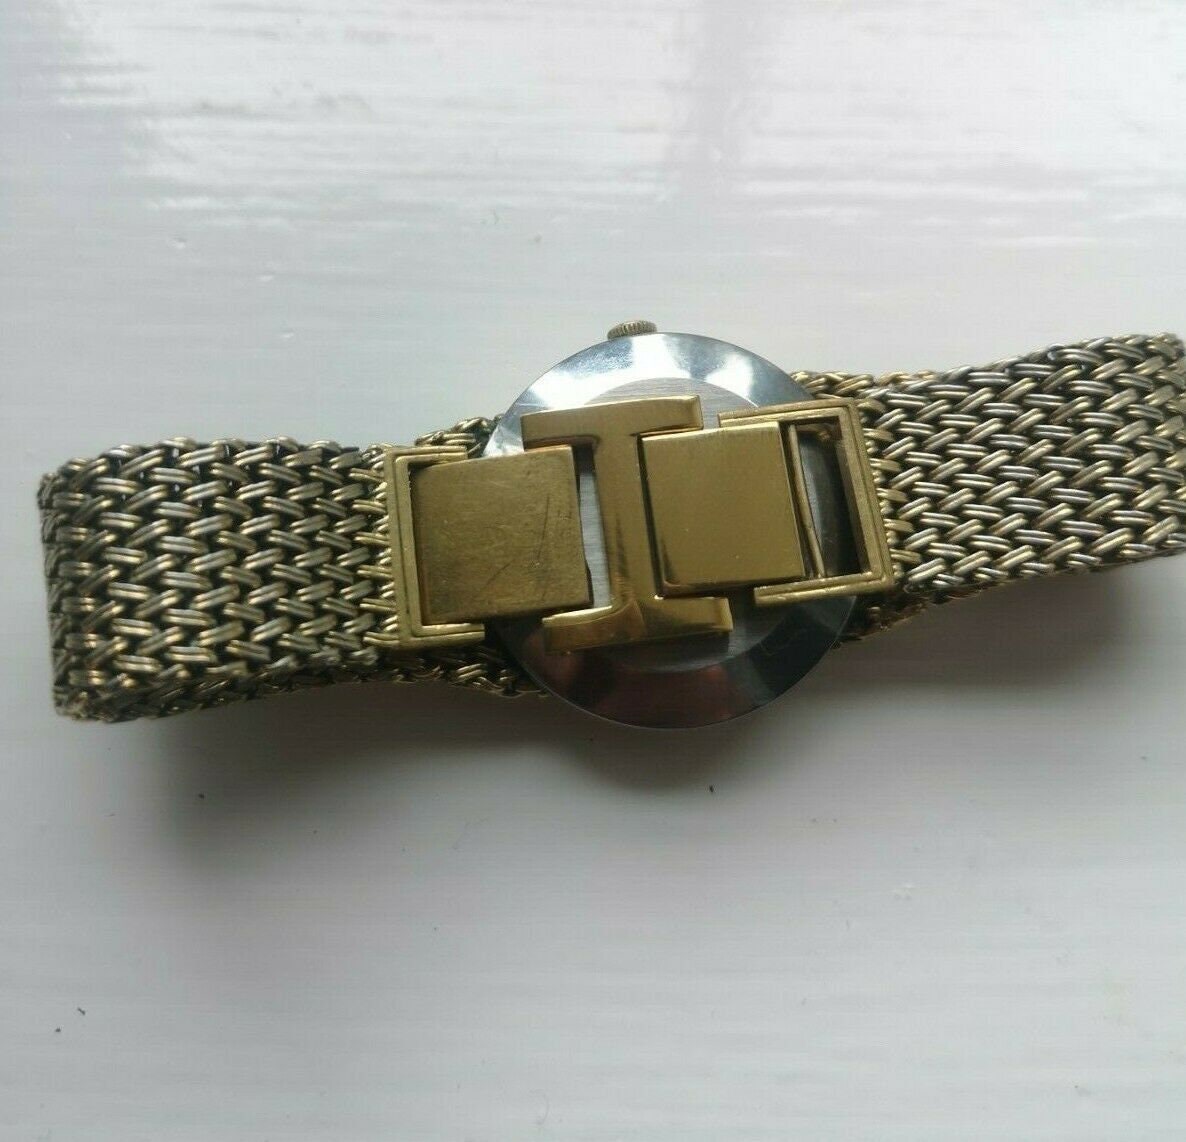 Stainless Steel Silver Wrist Watch Band Bracelet Extender With Fold Over  Link Clasp / Vintage Watch Extender / for Mens or Womens Watches 